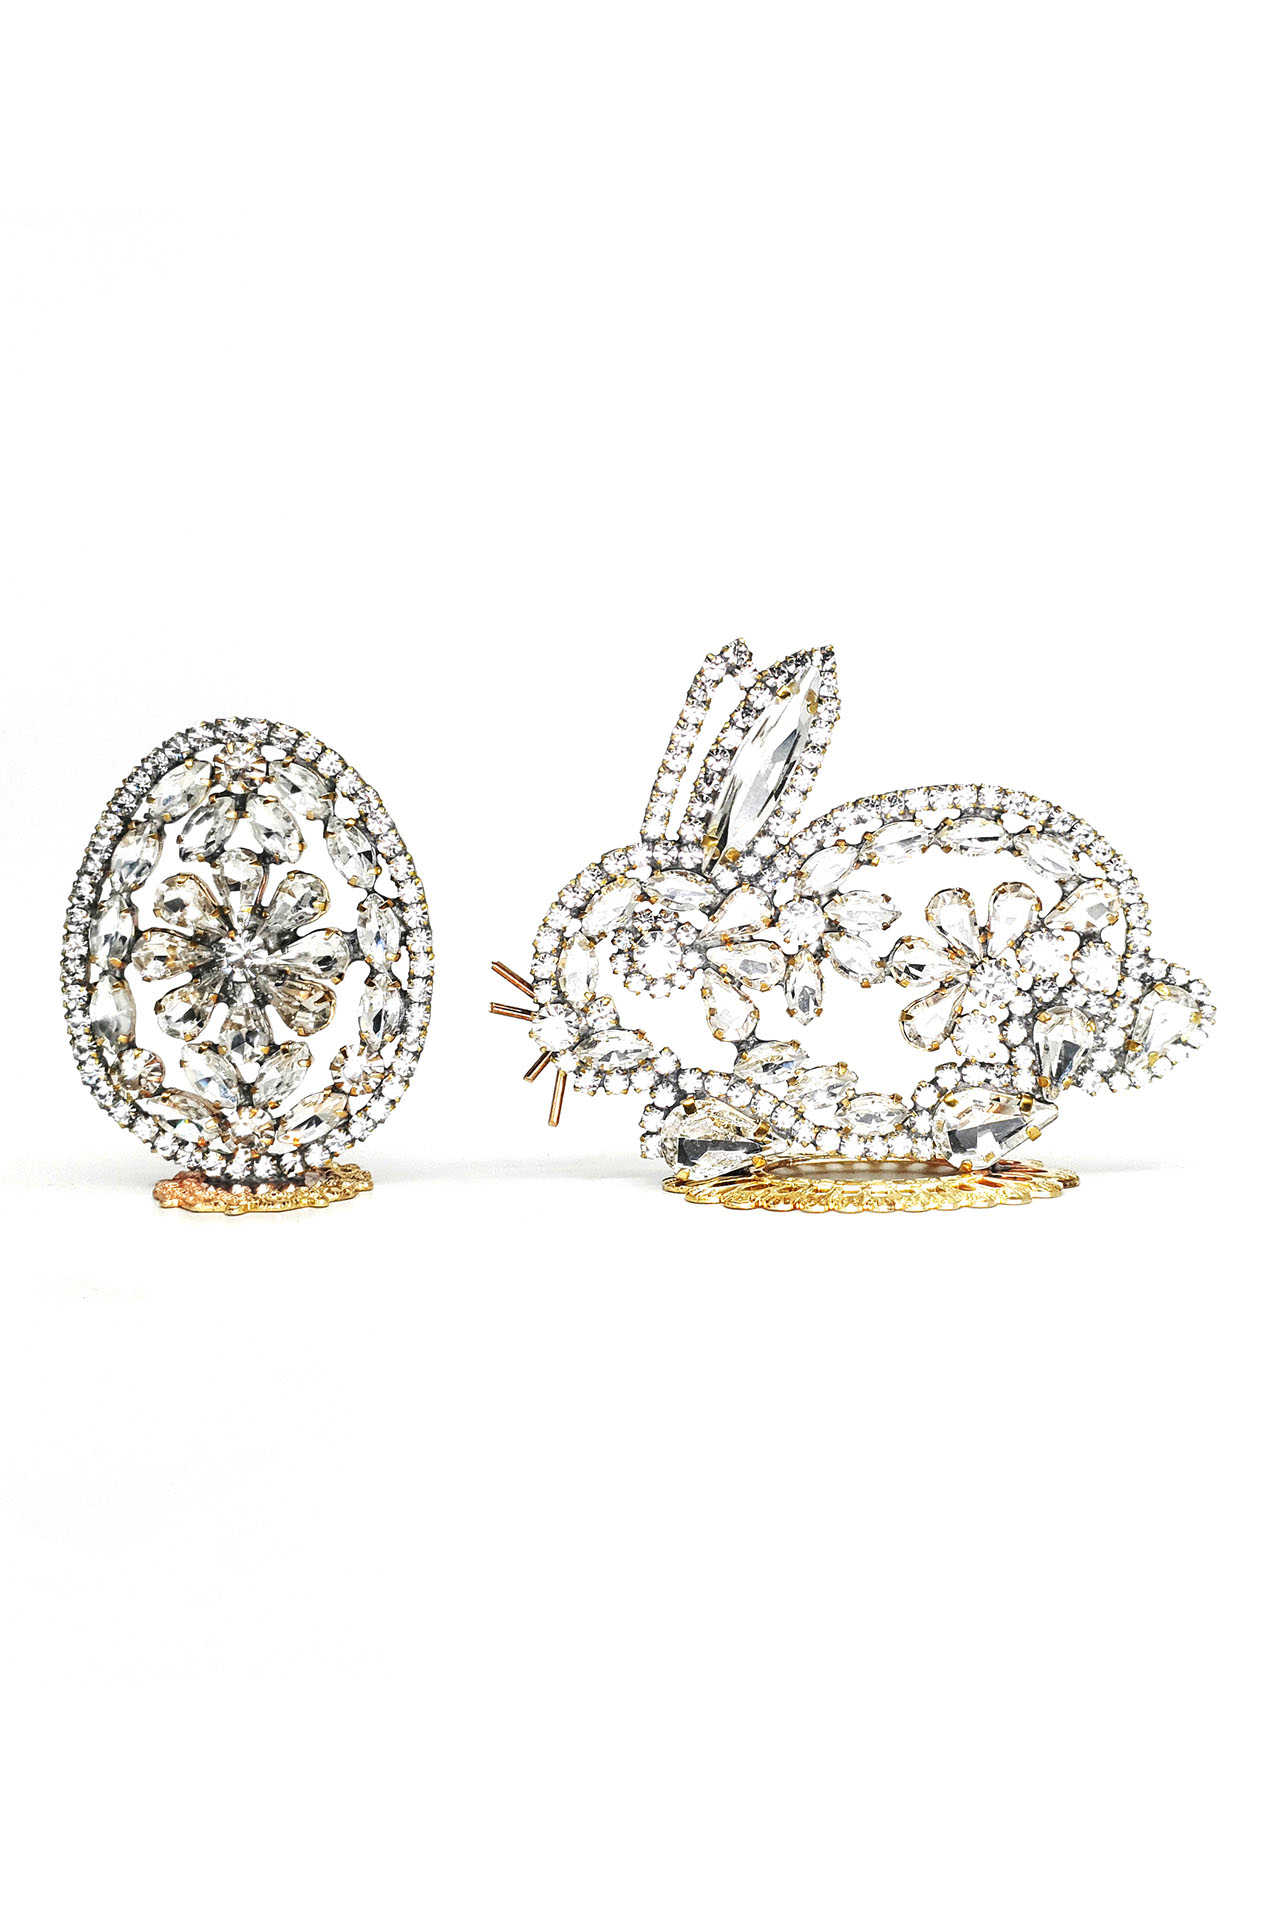 Rhinestone Easter Bunny and Easter Egg, Easter decoration